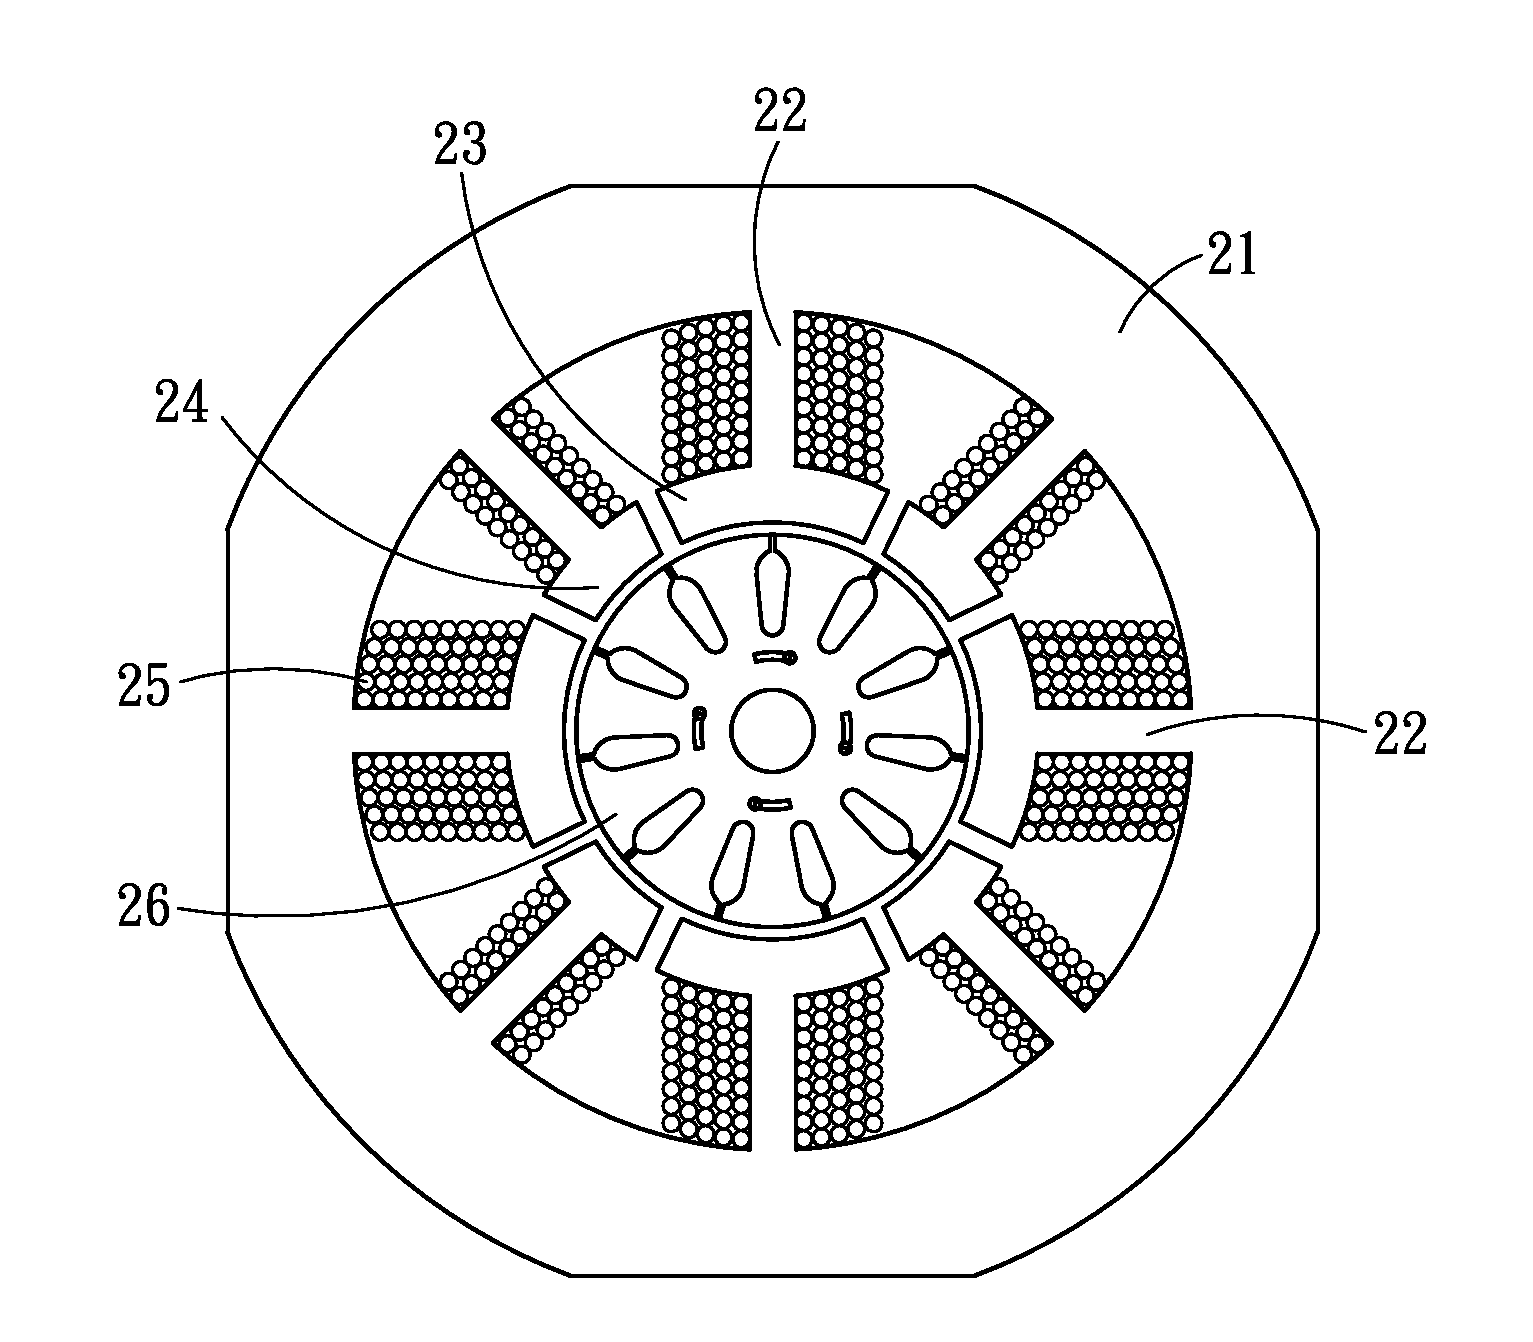 Stator structure of motor